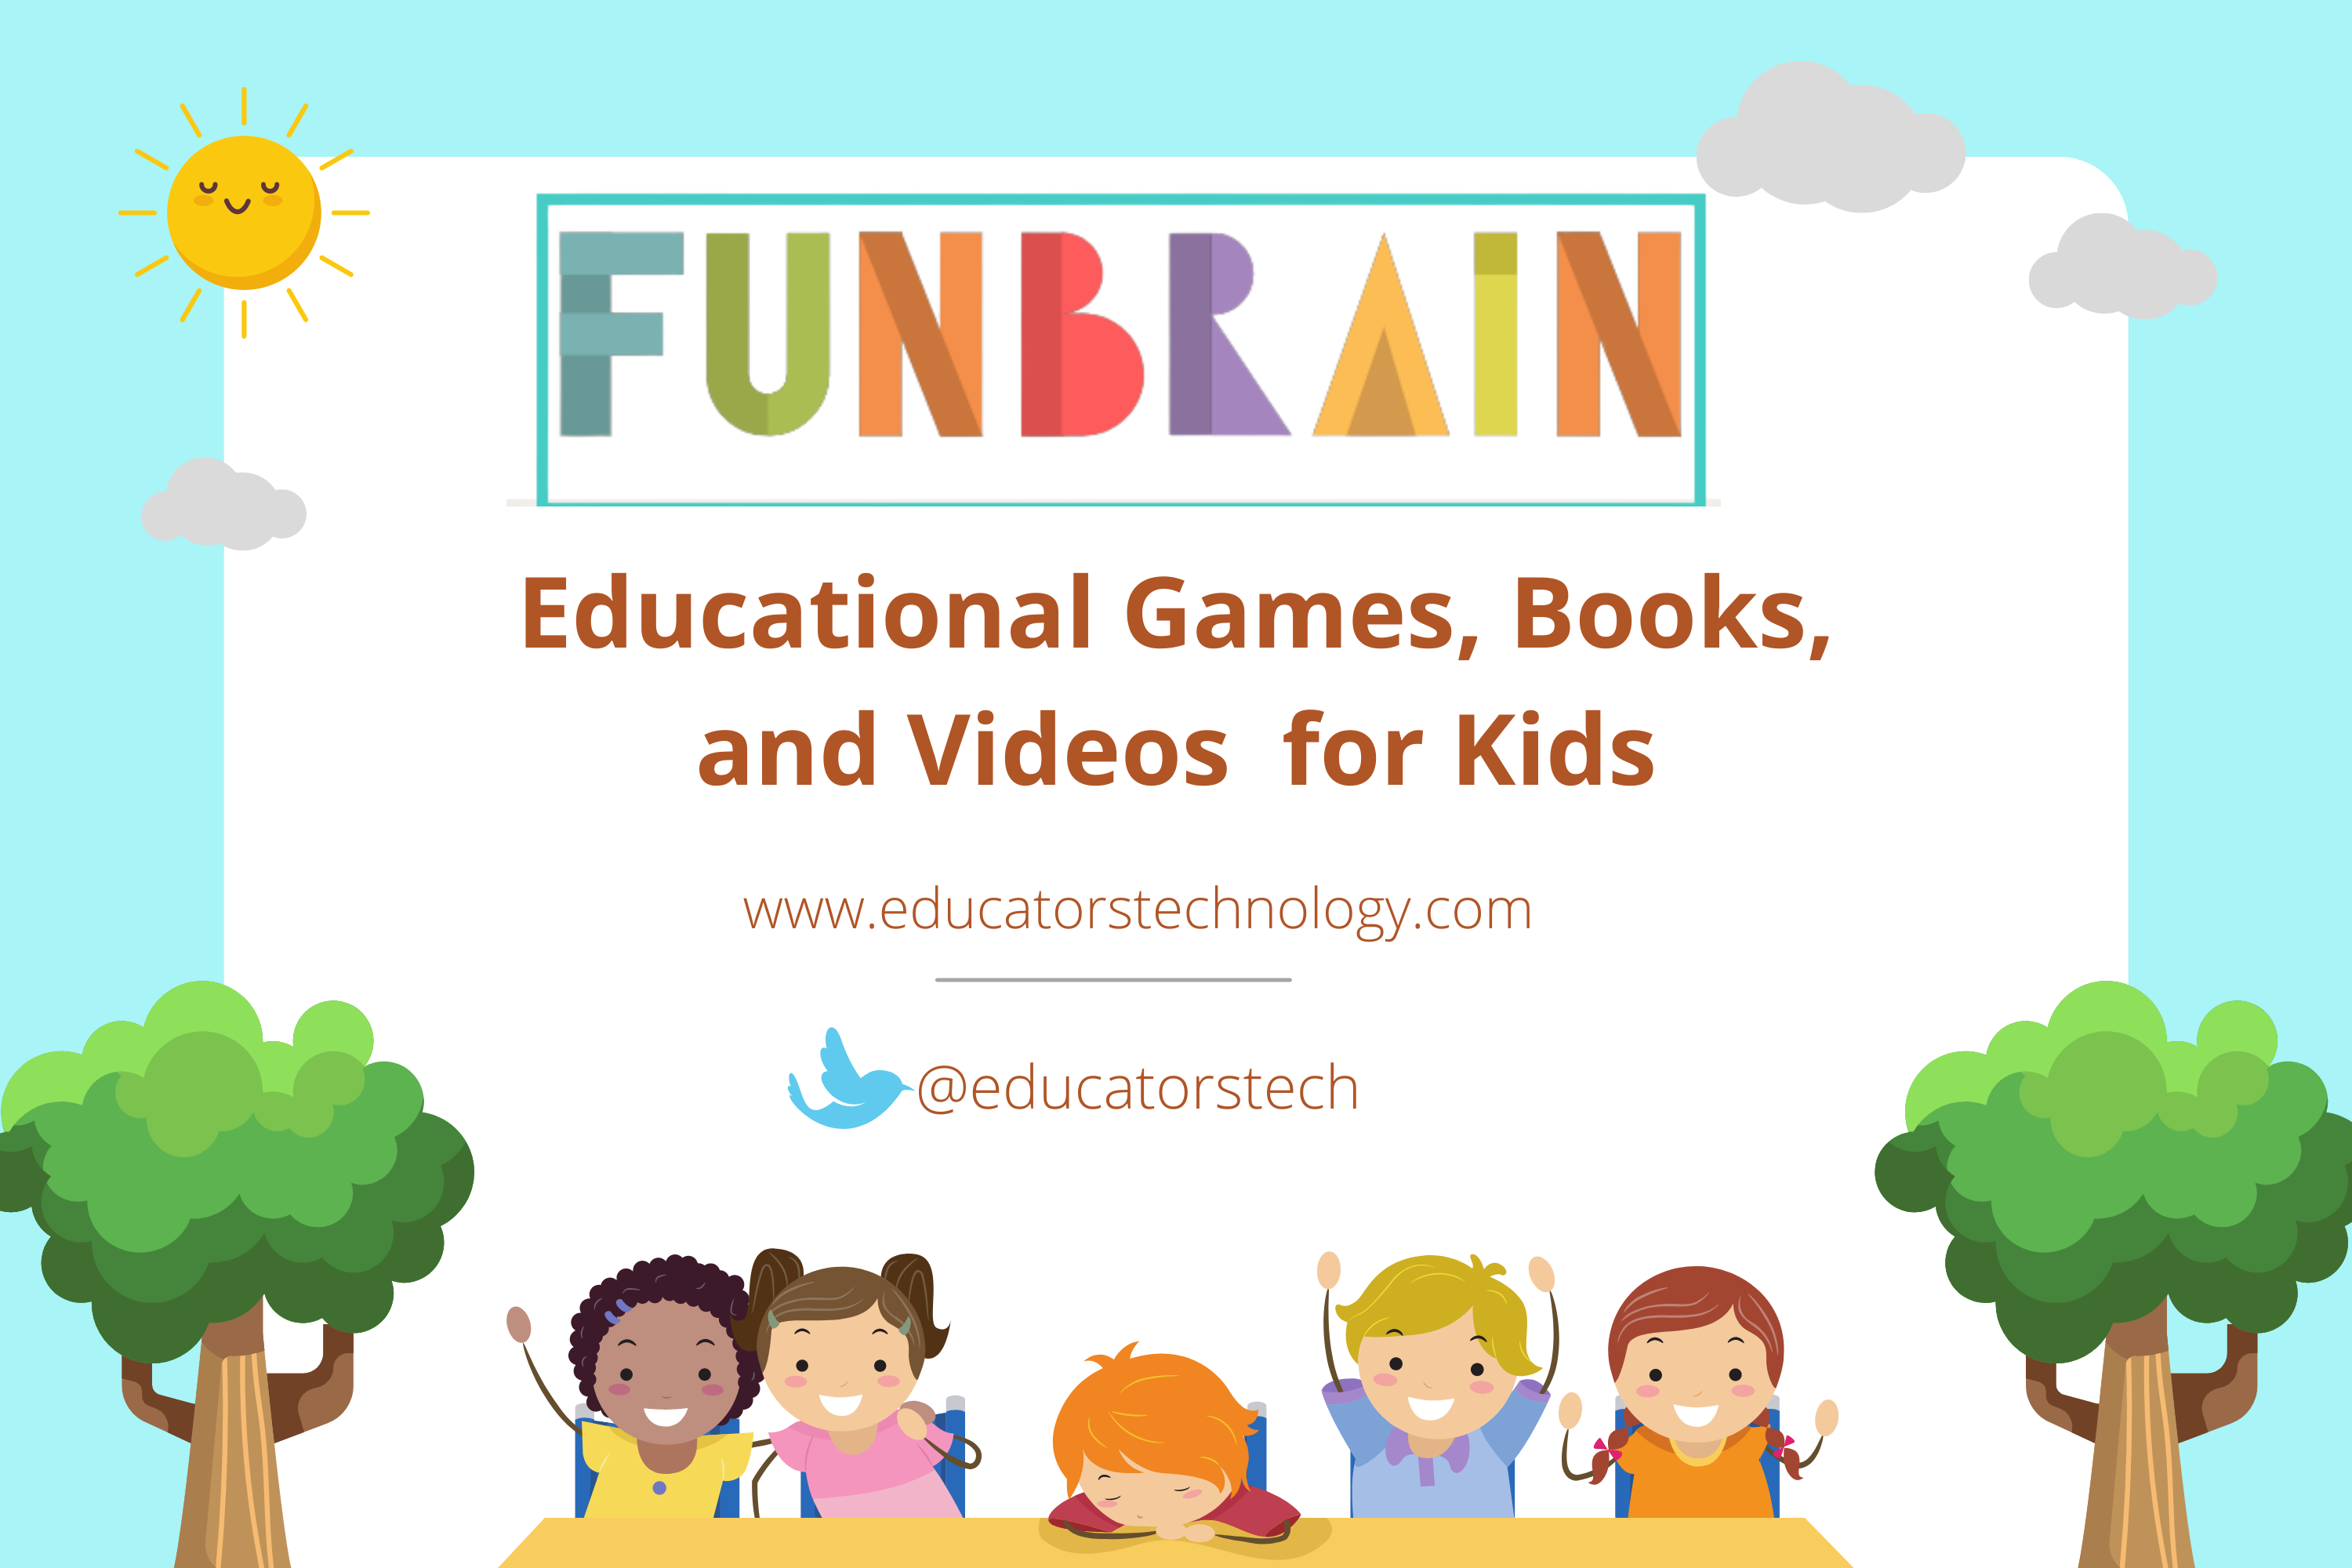 Funbrain games, books, and videos for kids